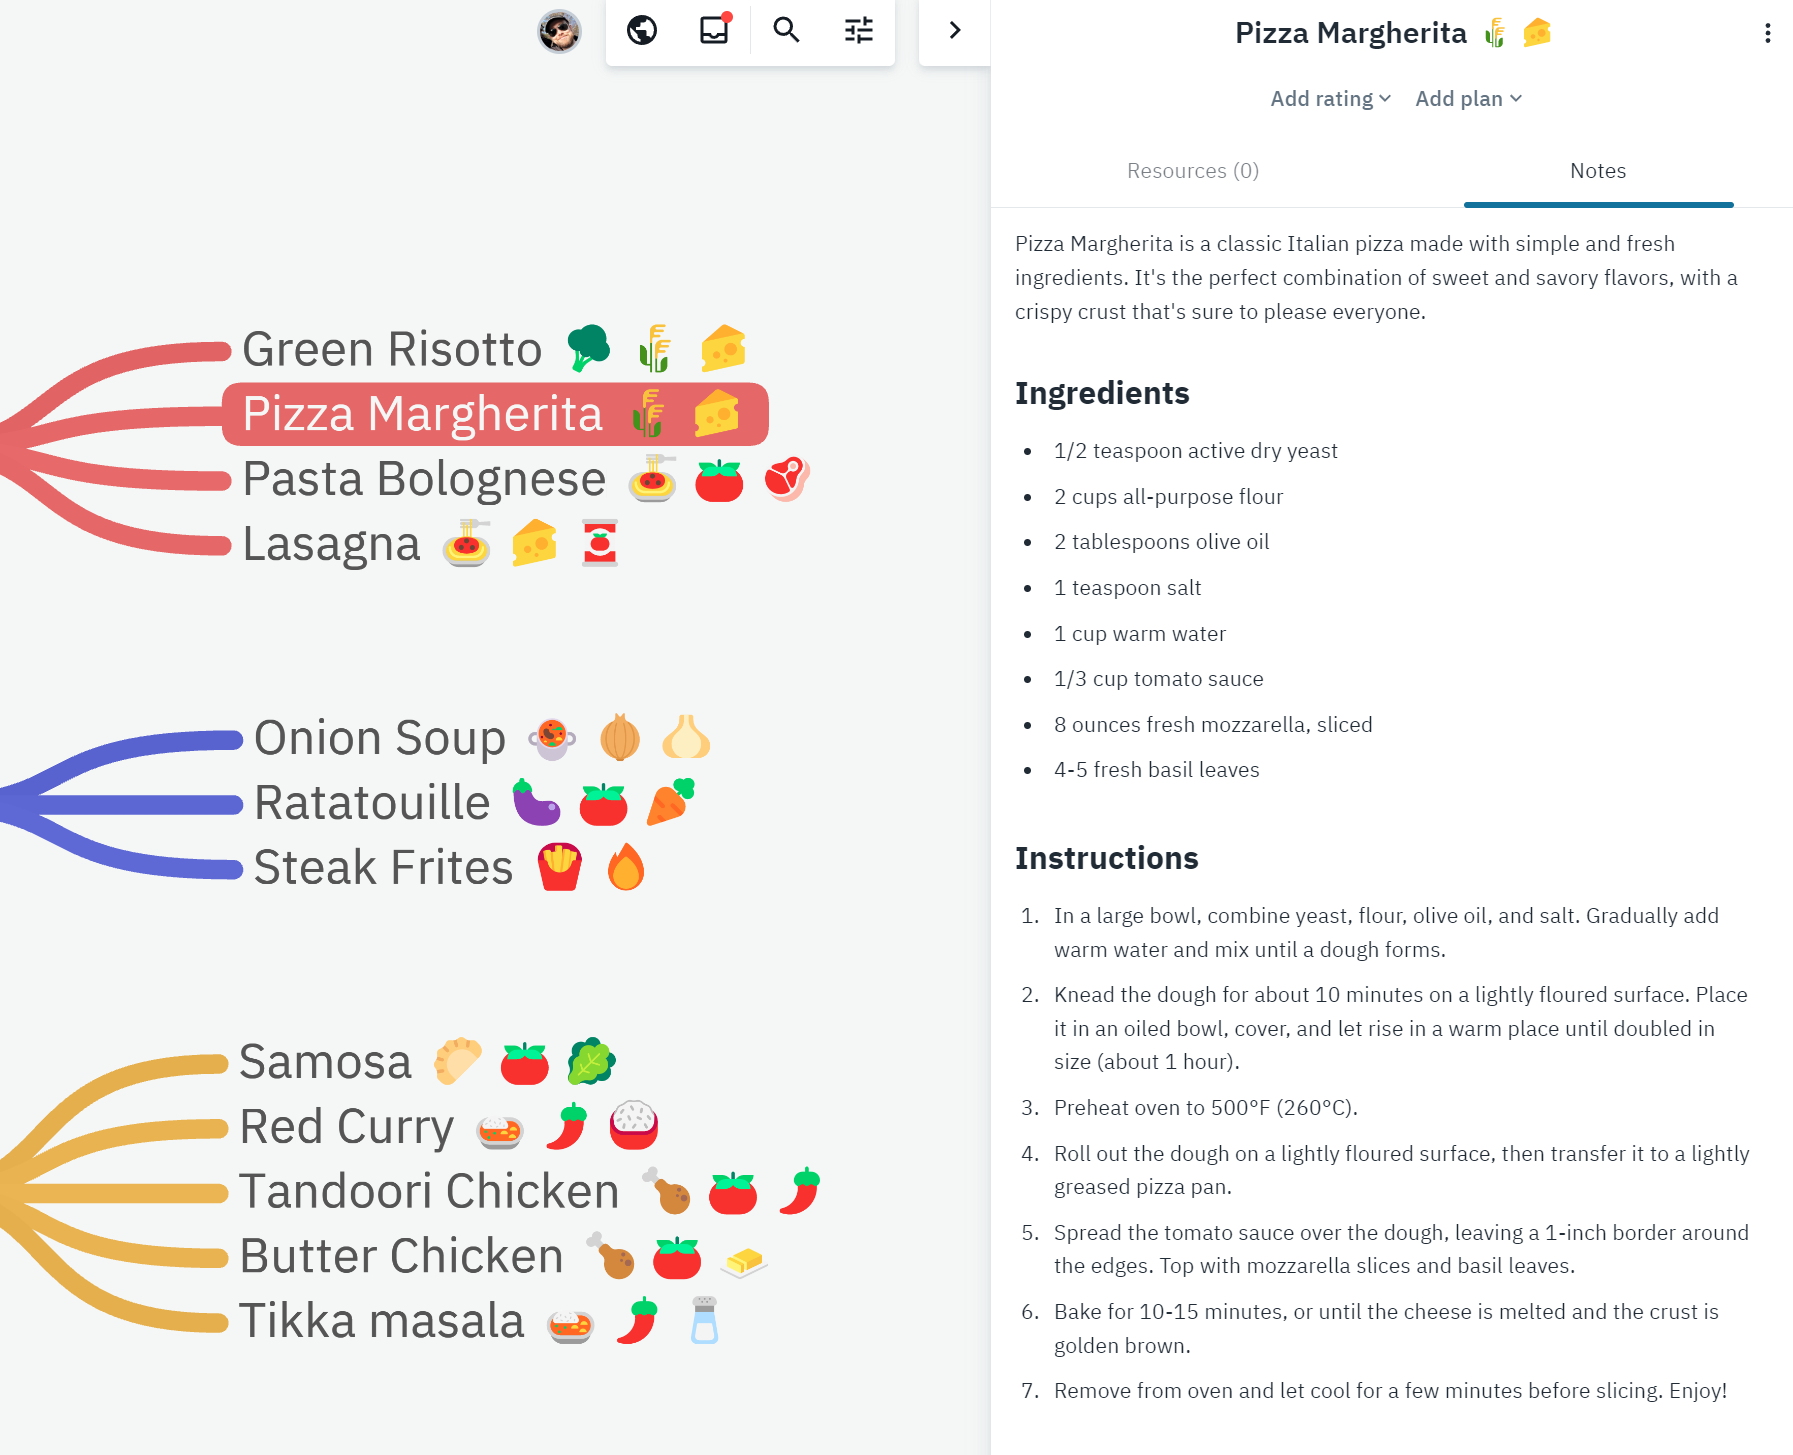 How to organize your recipes using a mind-map